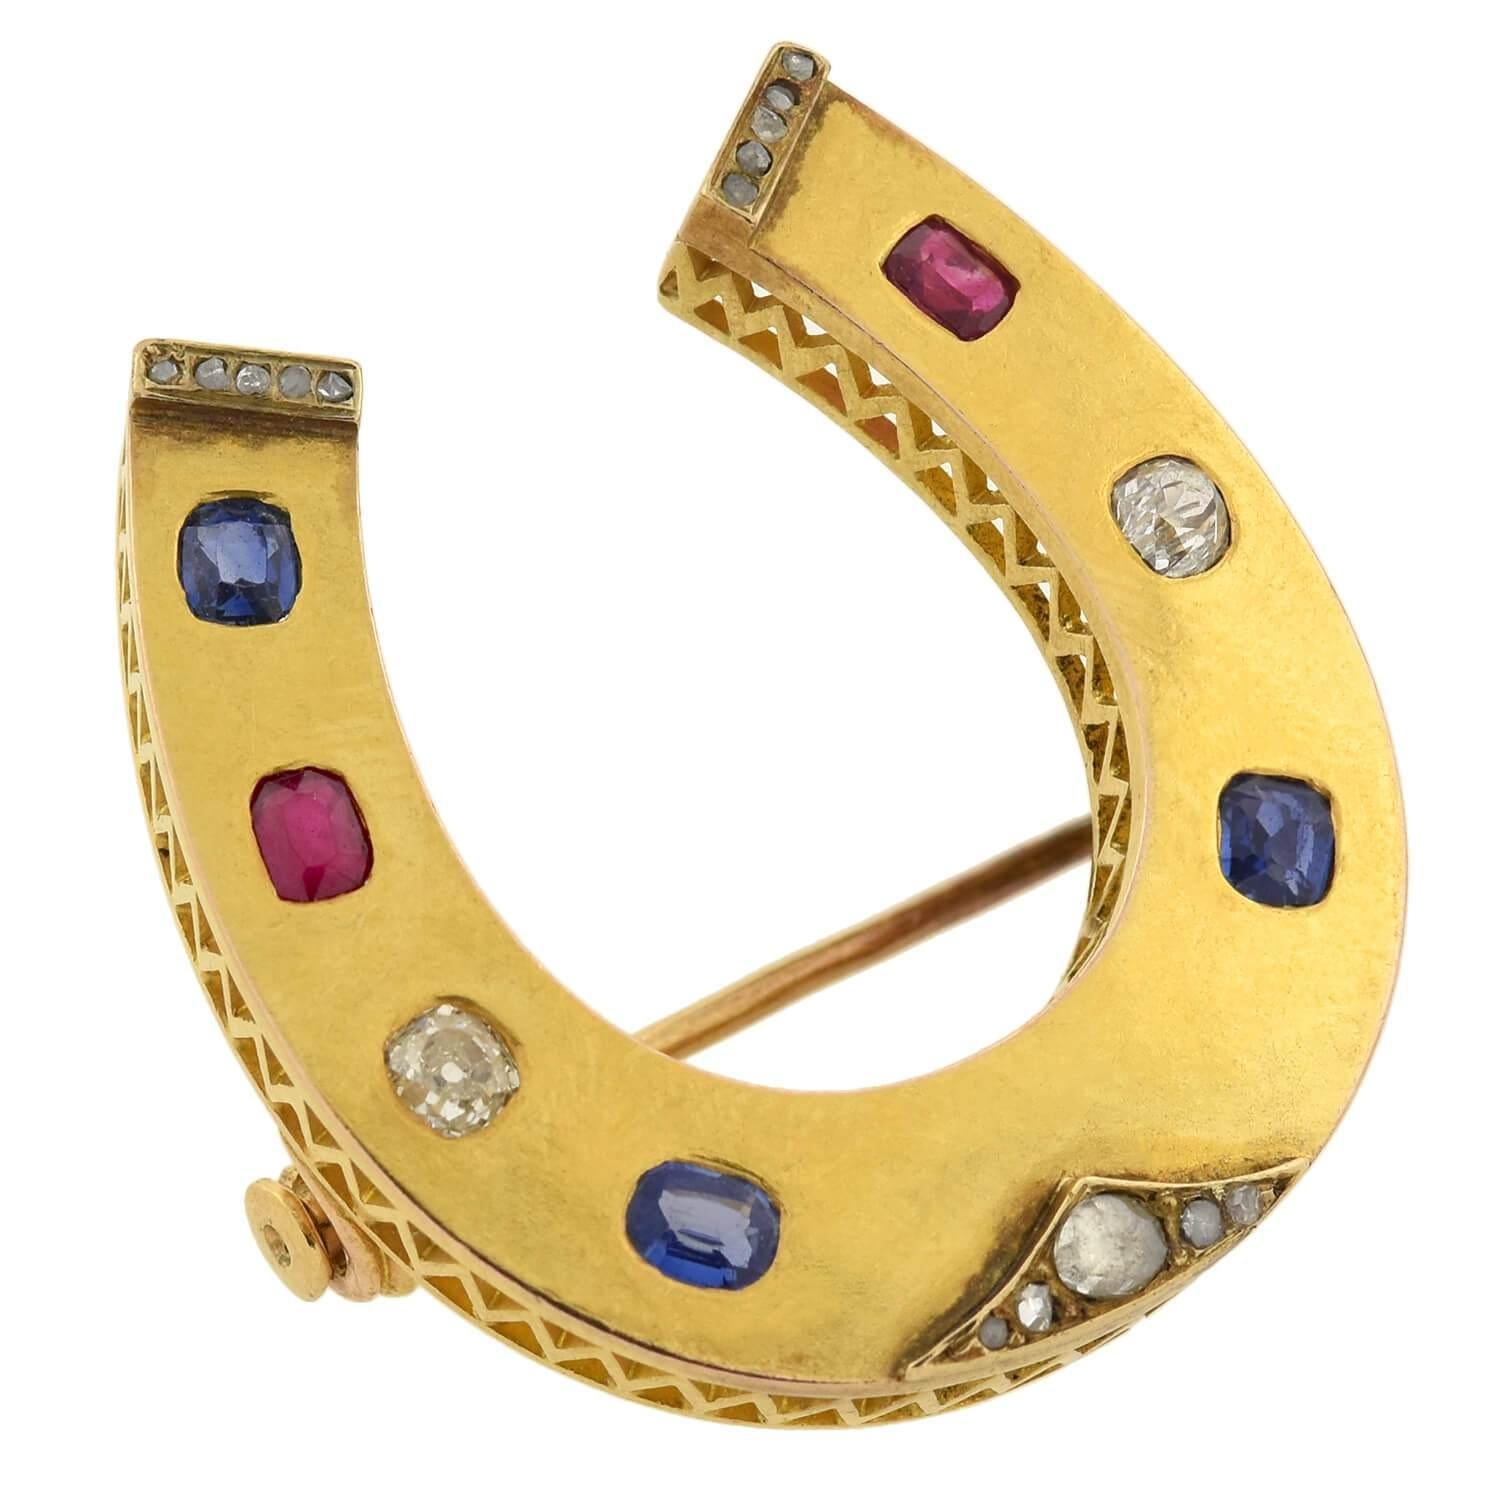 An absolutely exquisite gemstone pin from the Victorian (ca1847-1919) era! Crafted in vibrant 18kt yellow gold, this fantastic piece consists of a relatively large horseshoe motif lined with 7 (always 7 for good luck!) rich gemstones. The smoothly